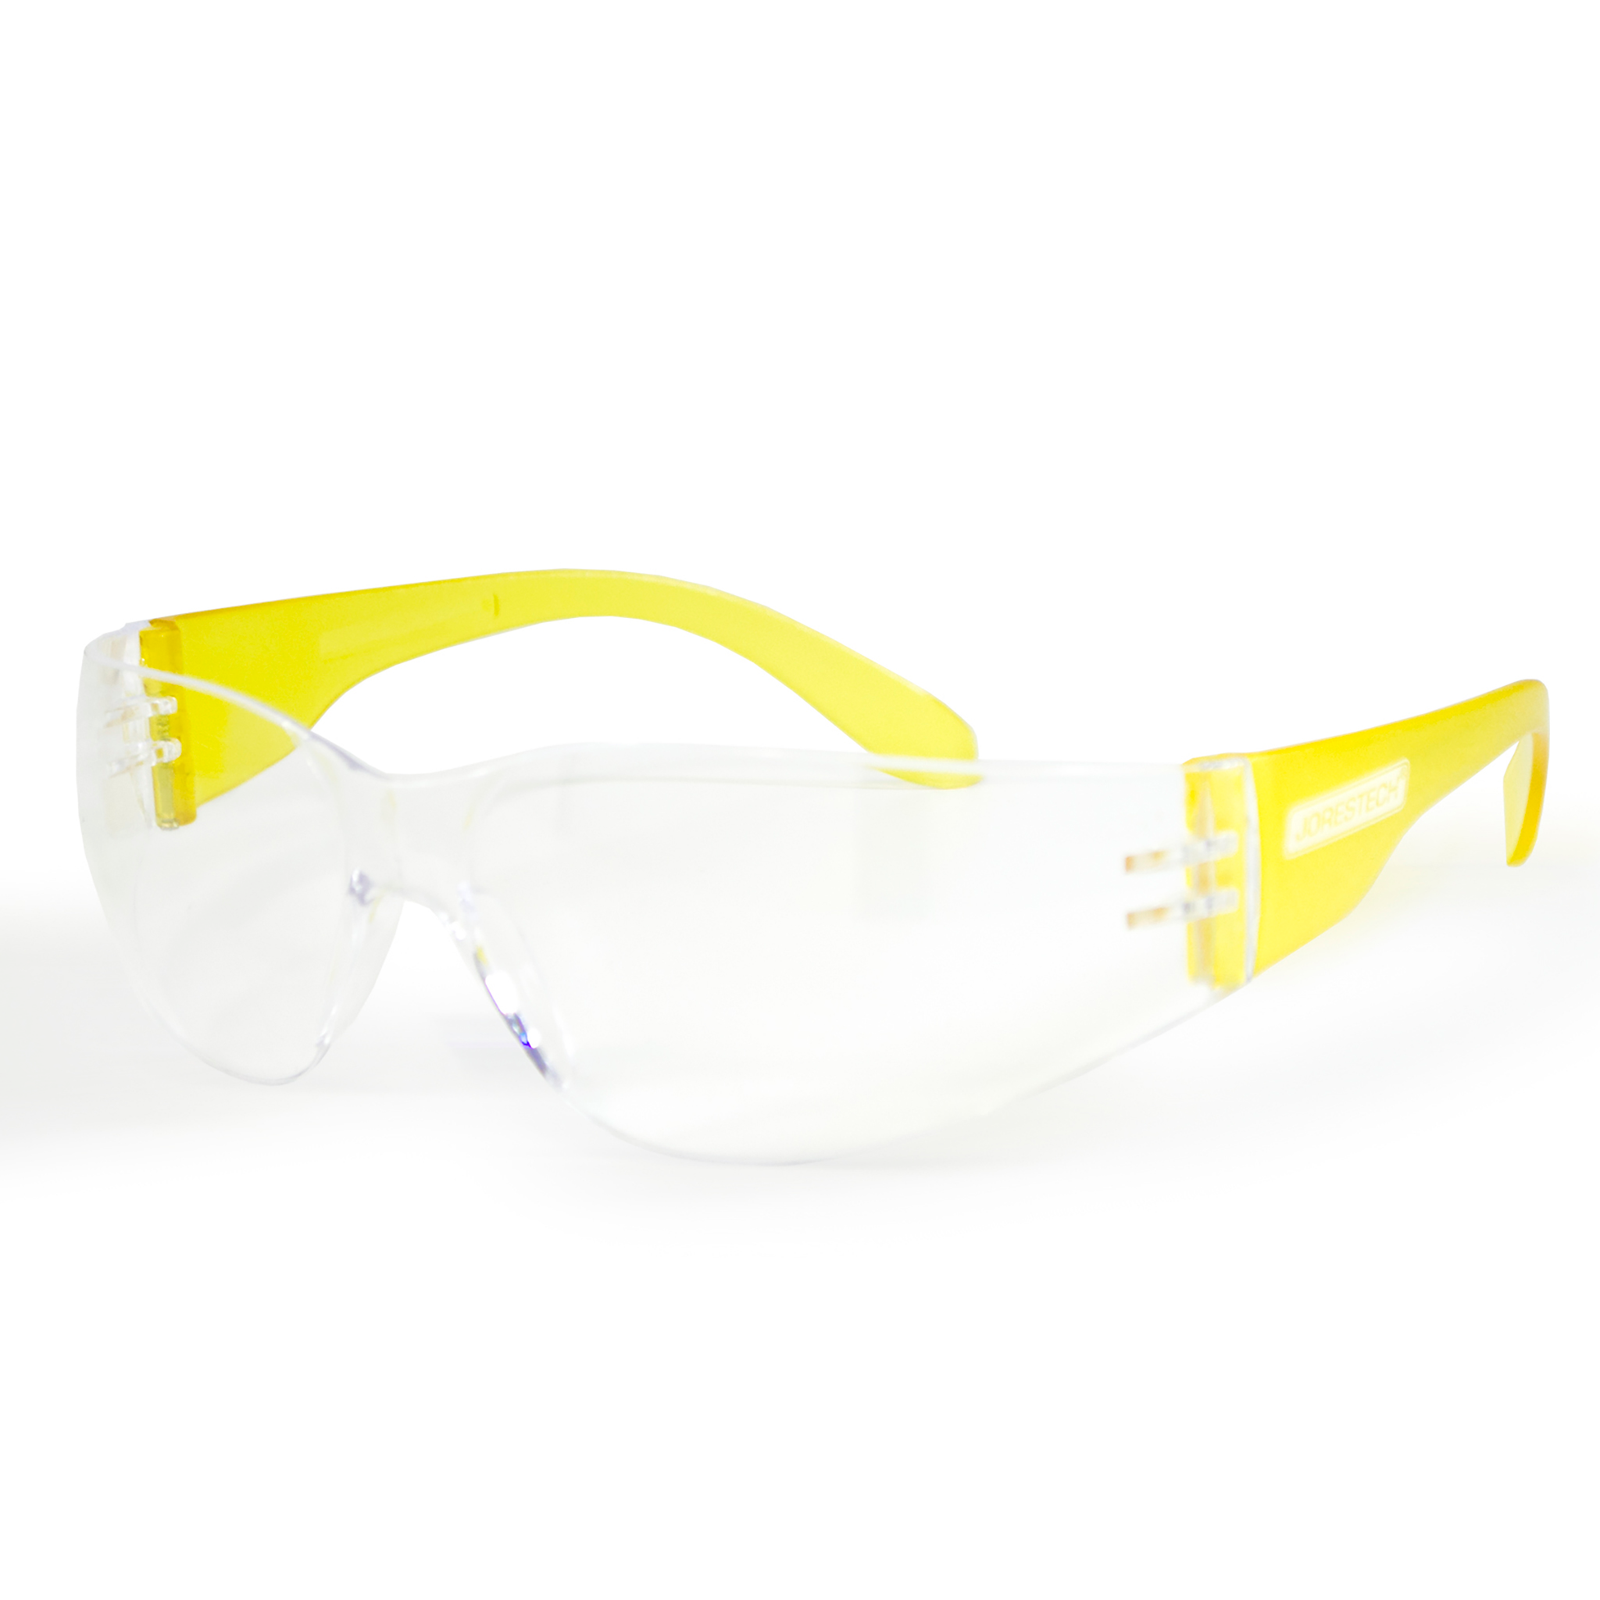 Features one JORESTECH high impact glass with clear polycarbonate lenses and yellow temples over white background